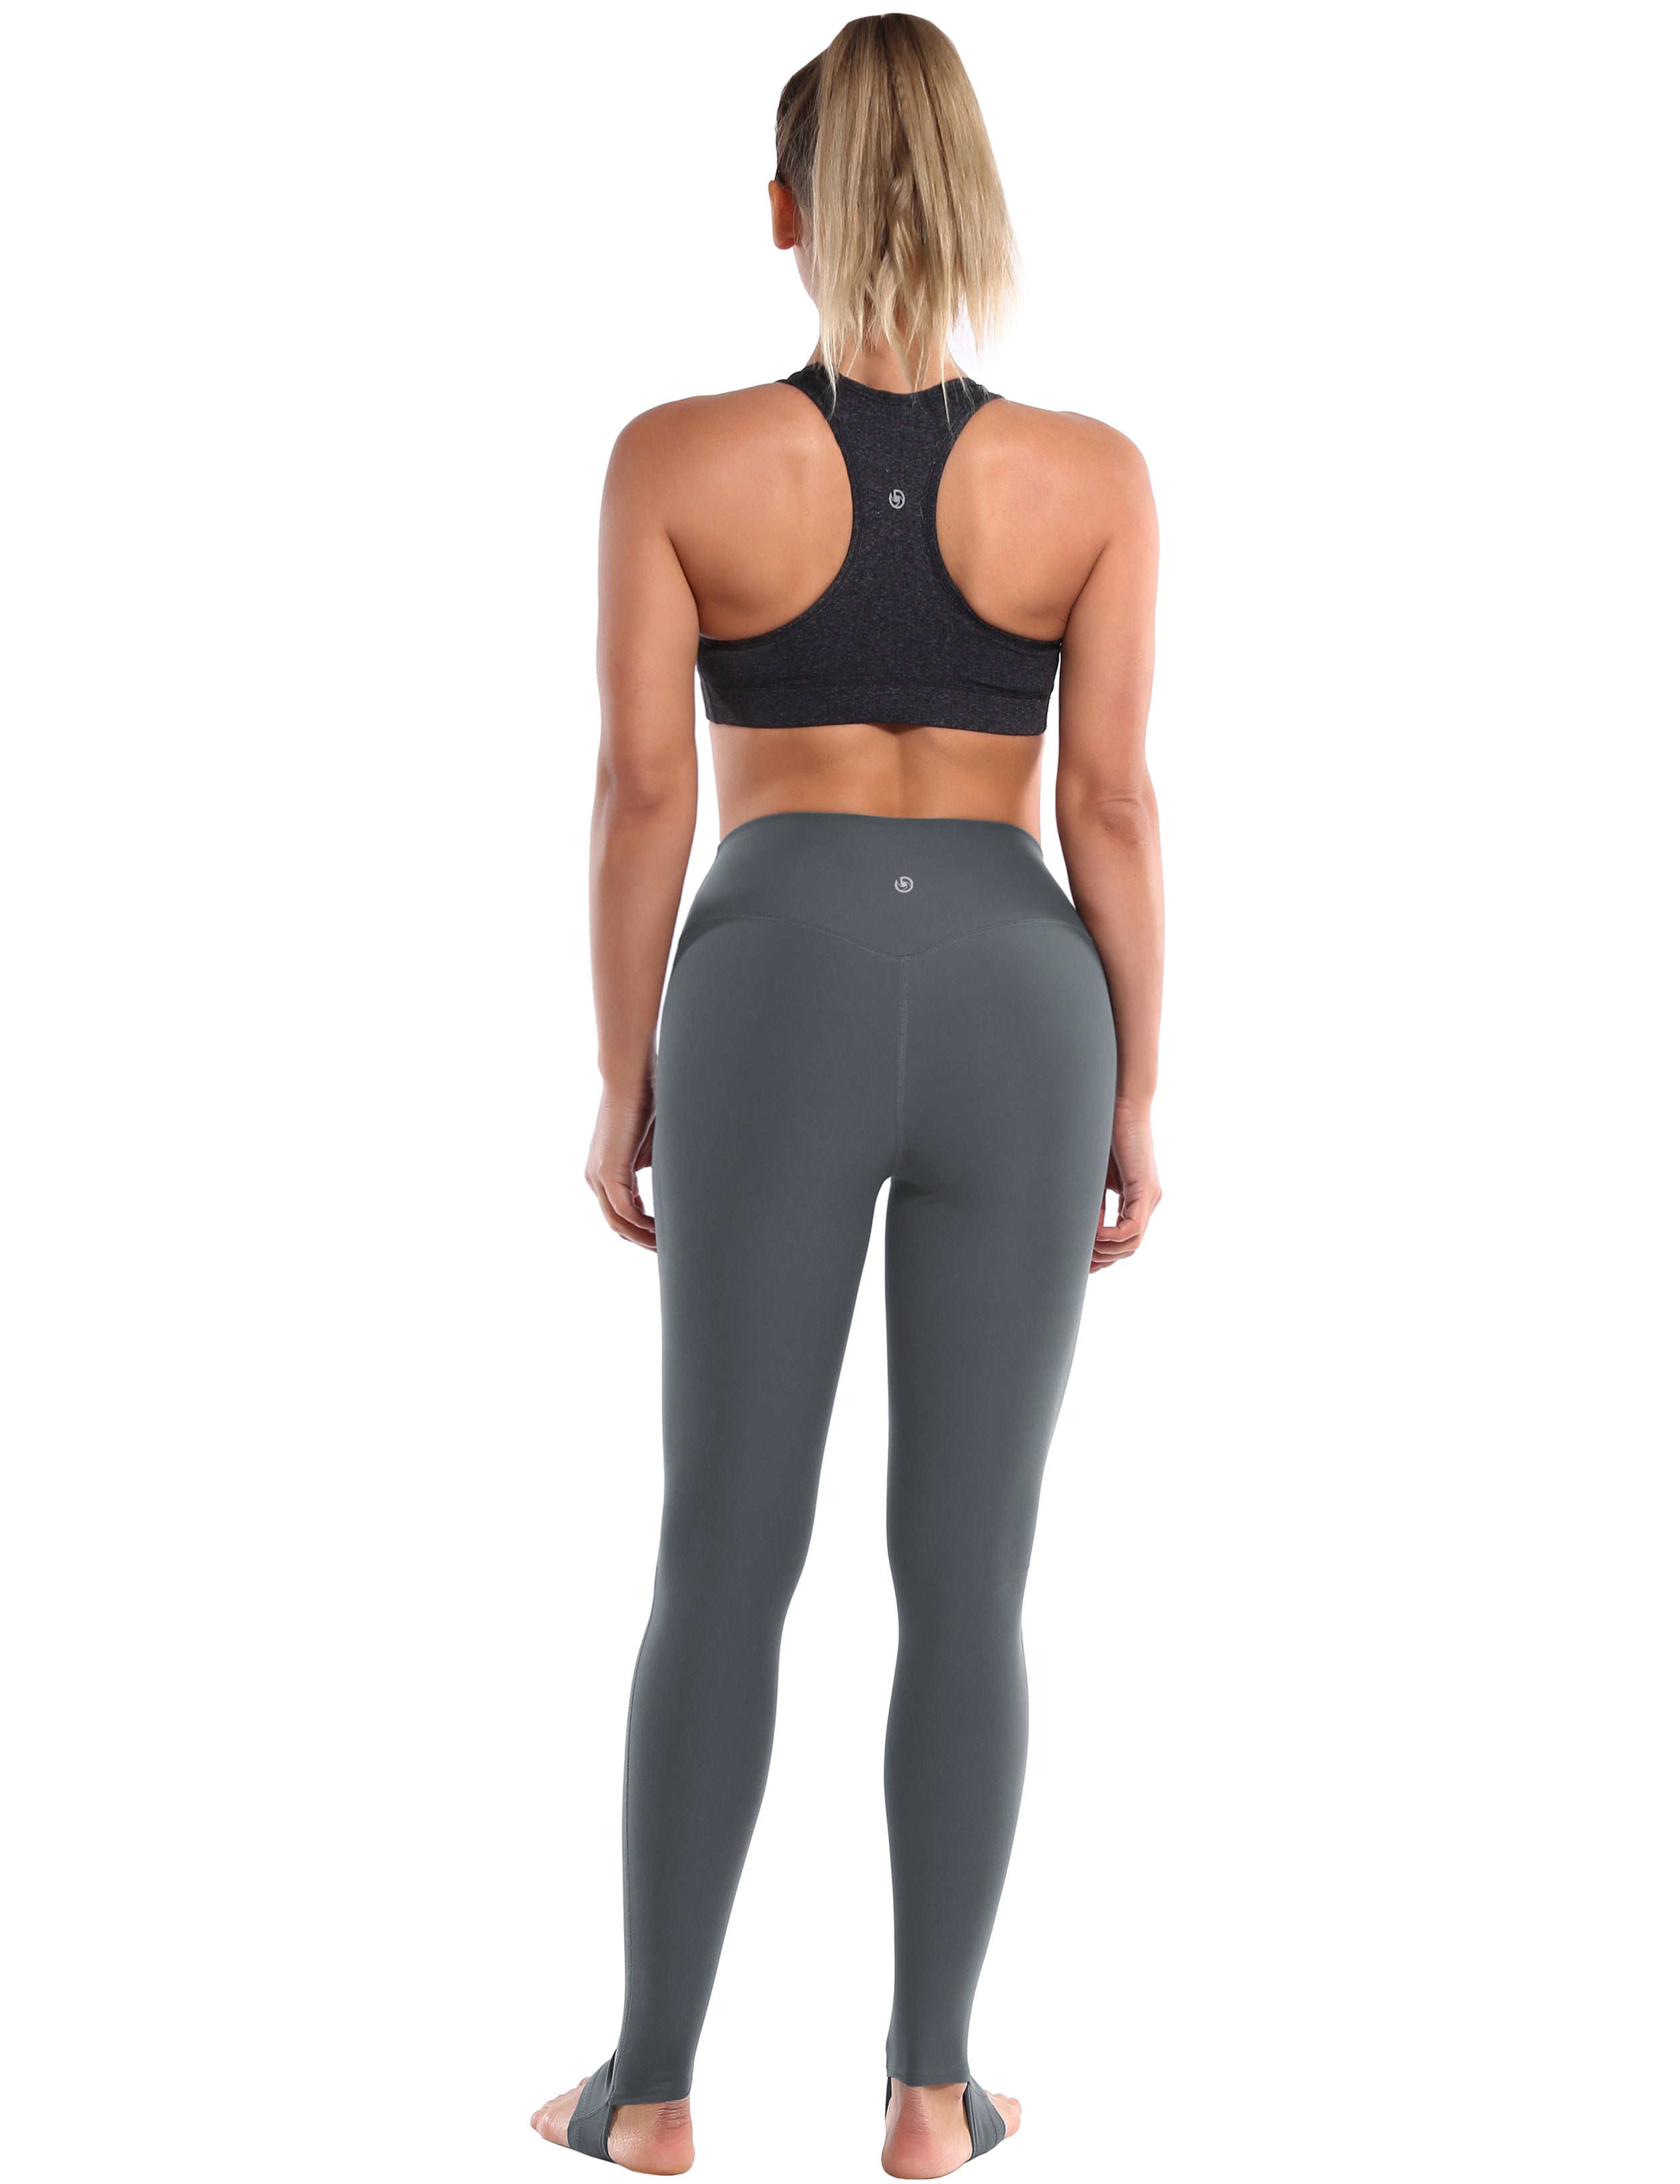 Over the Heel Golf Pants shadowcharcoal Over the Heel Design 87%Nylon/13%Spandex Fabric doesn't attract lint easily 4-way stretch No see-through Moisture-wicking Tummy control